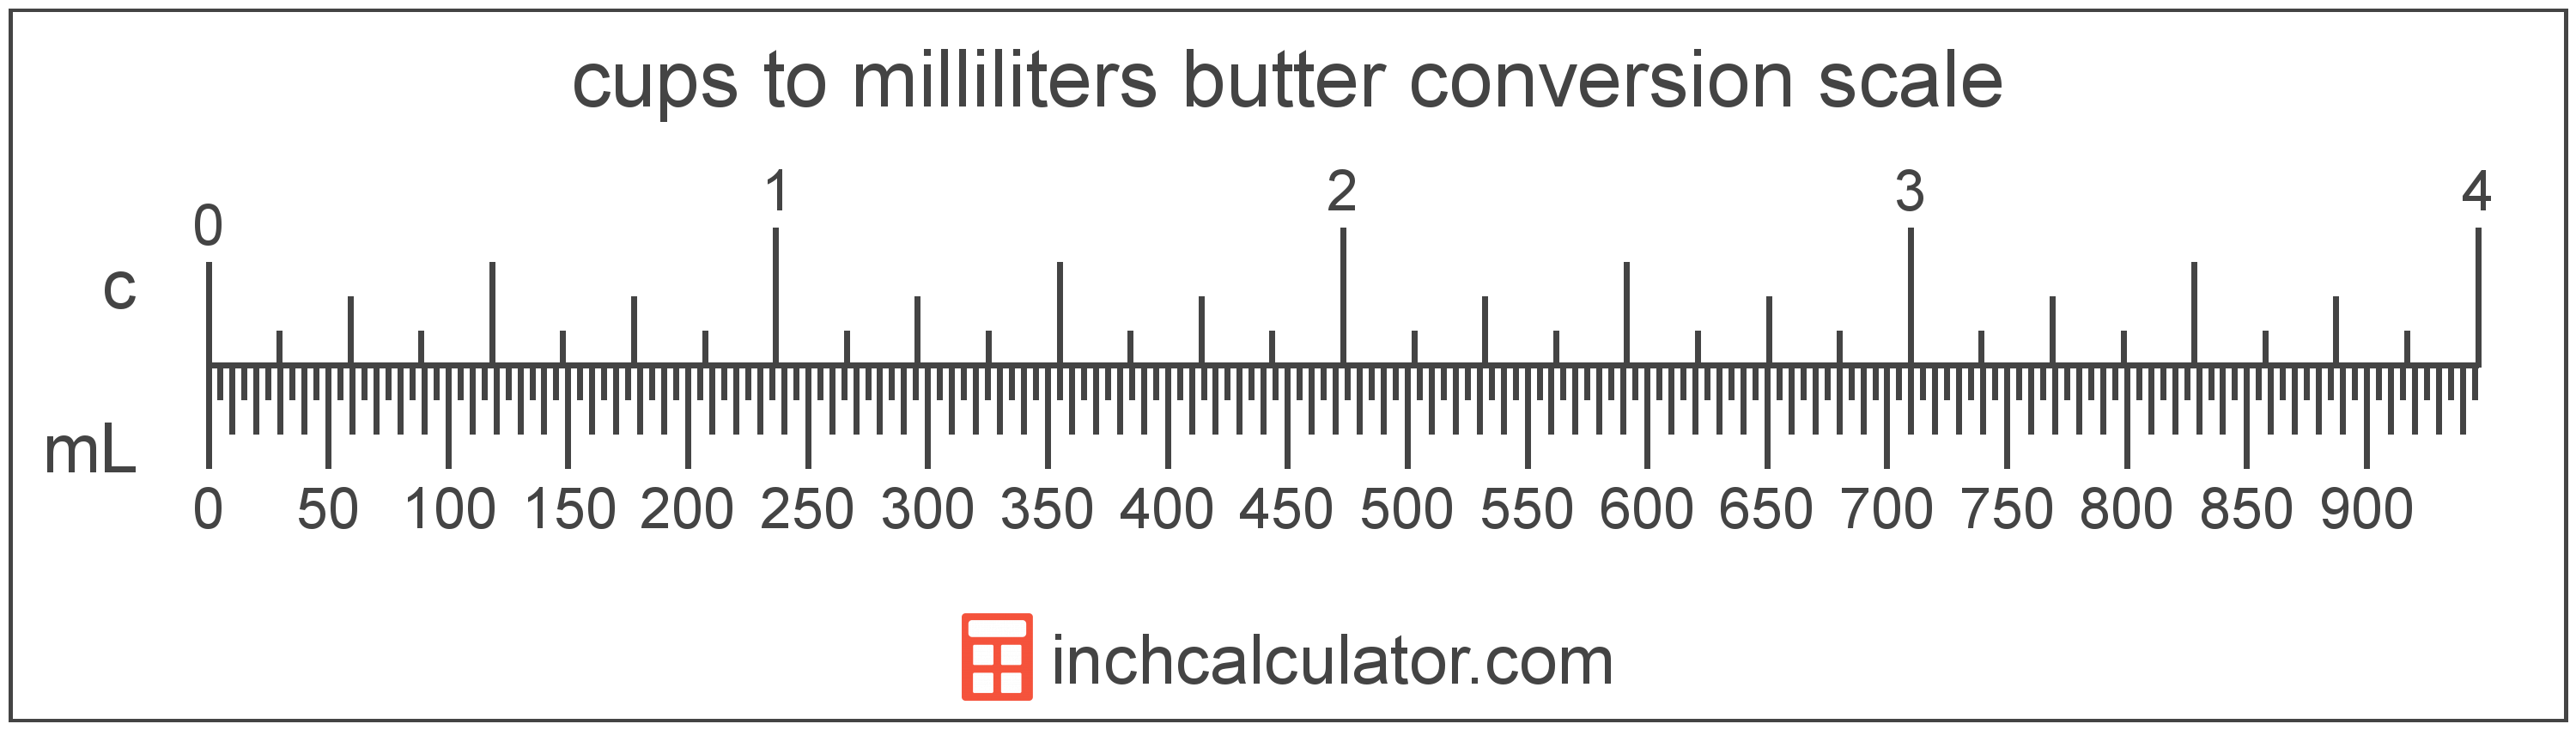 conversion scale showing cups and equivalent milliliters butter values